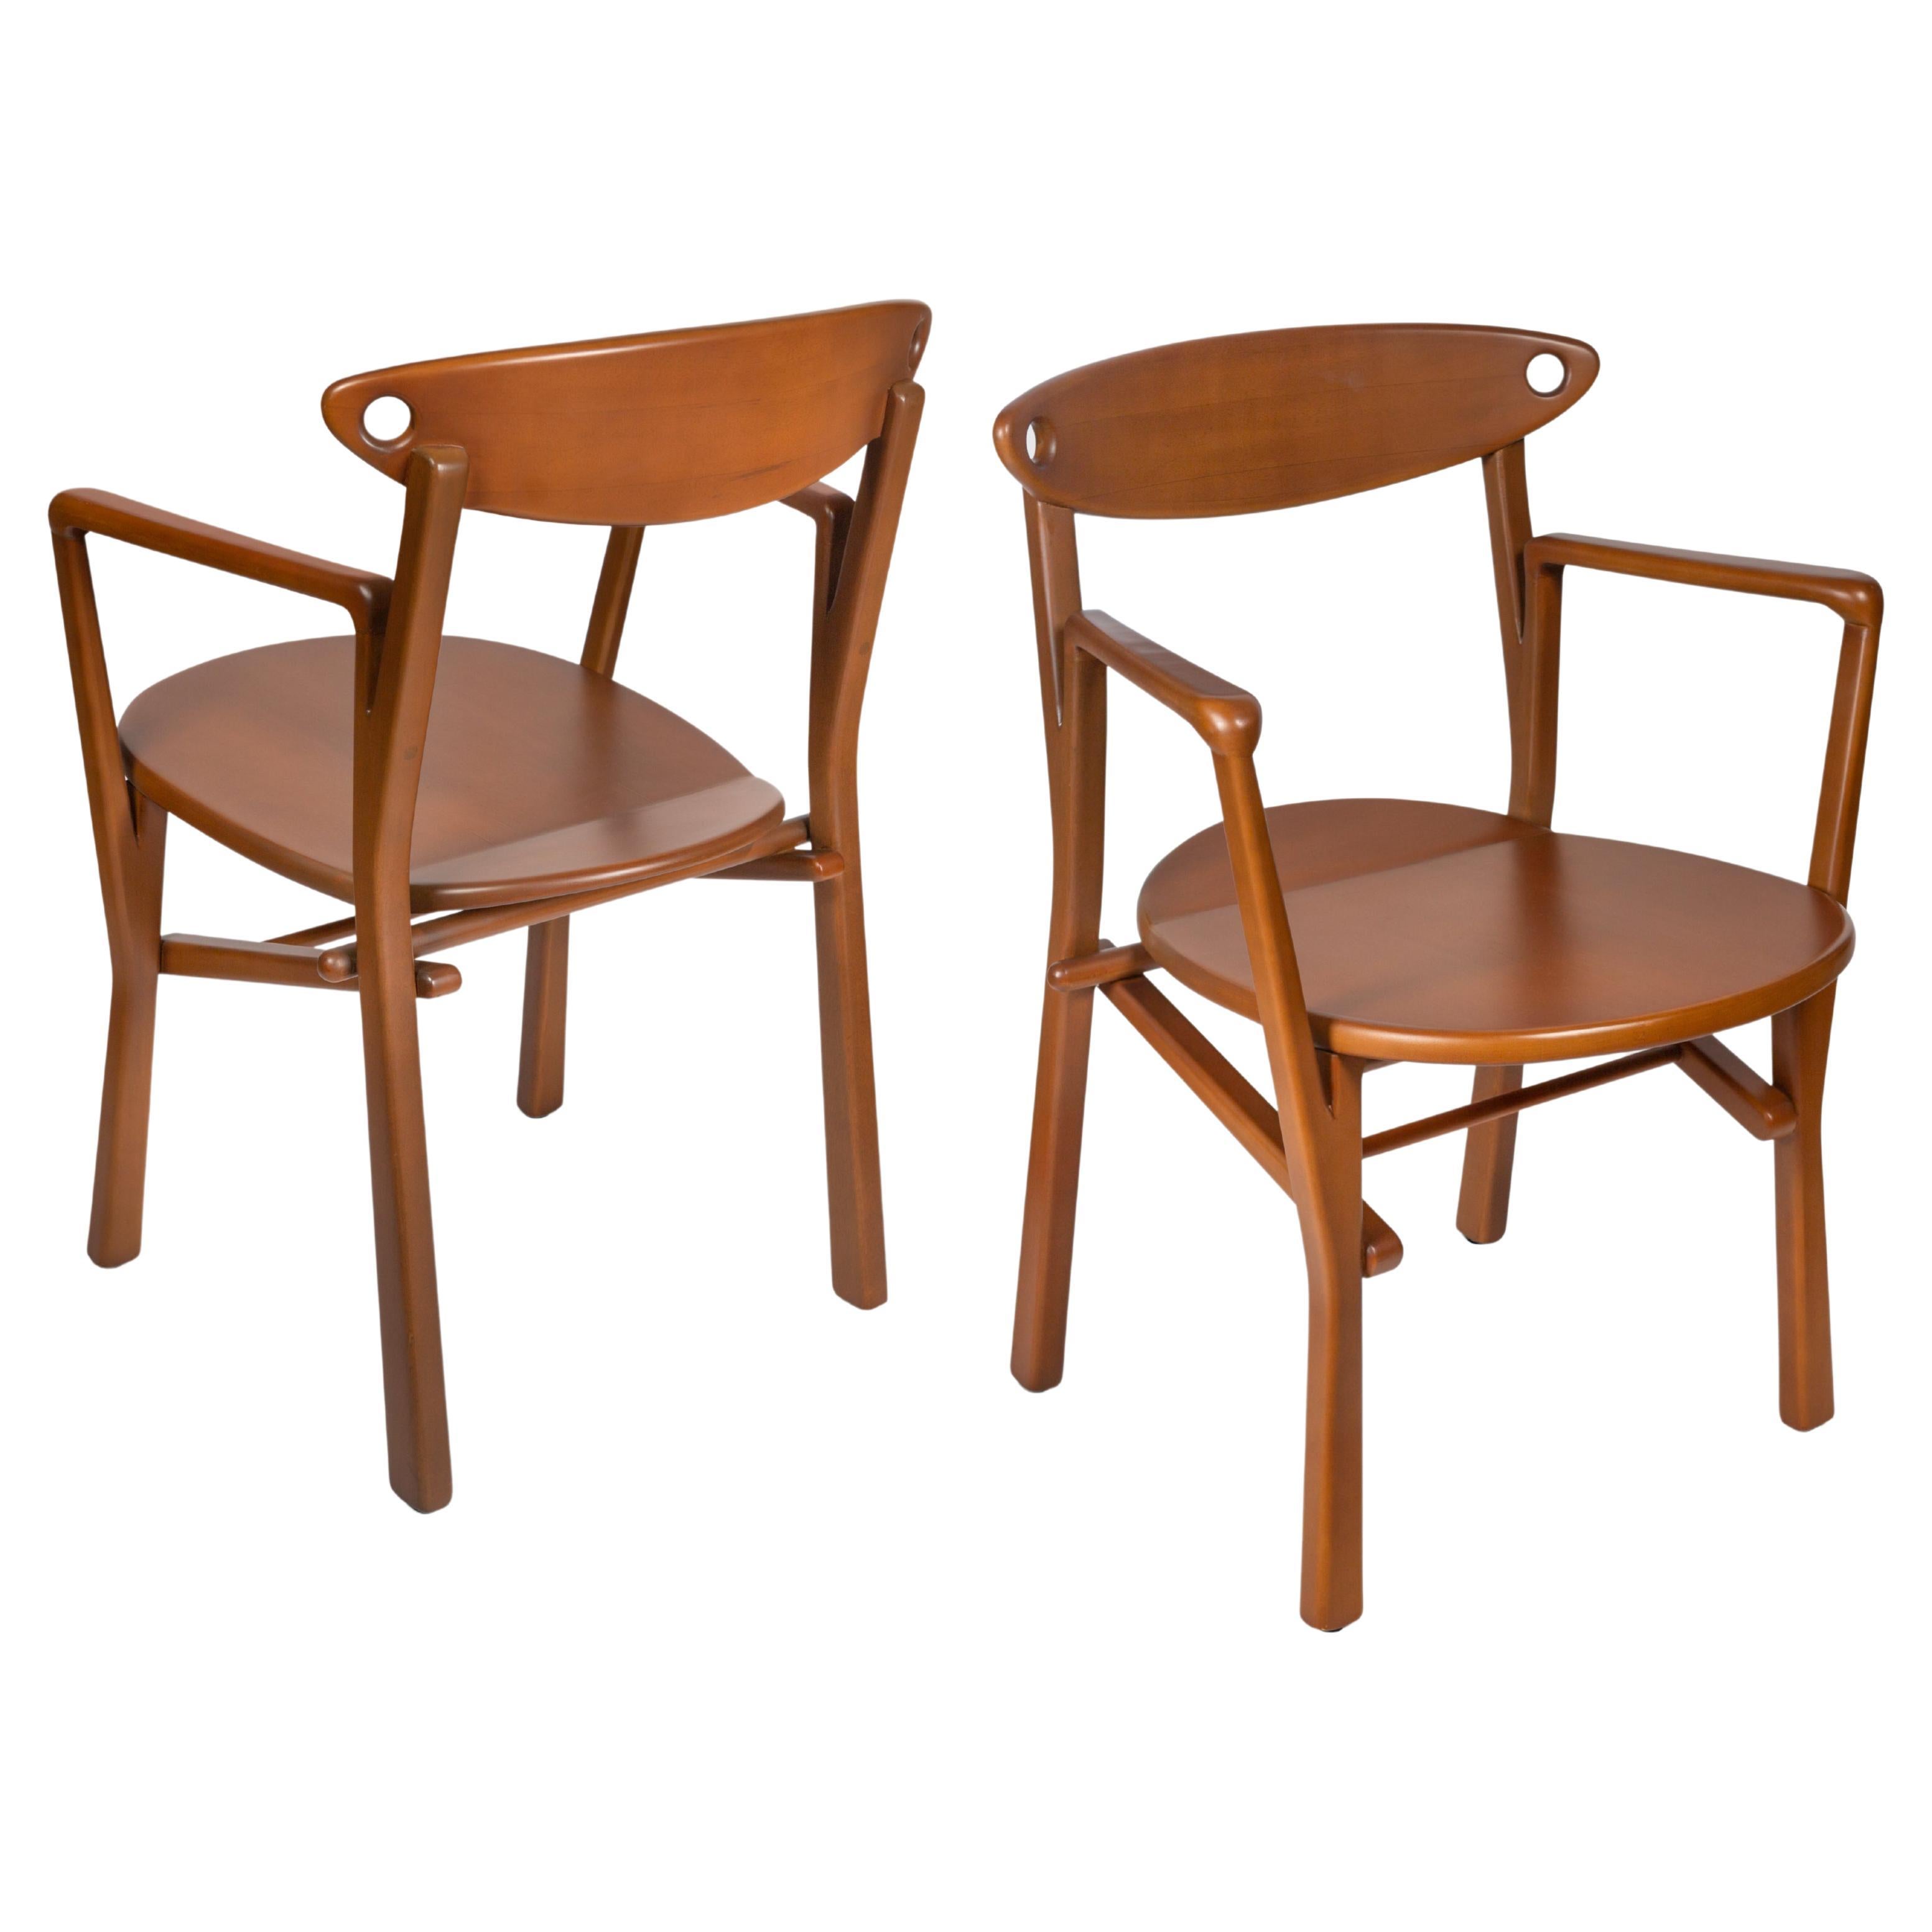 Set of 2 Armchairs Laje Light Brown Finish Wood